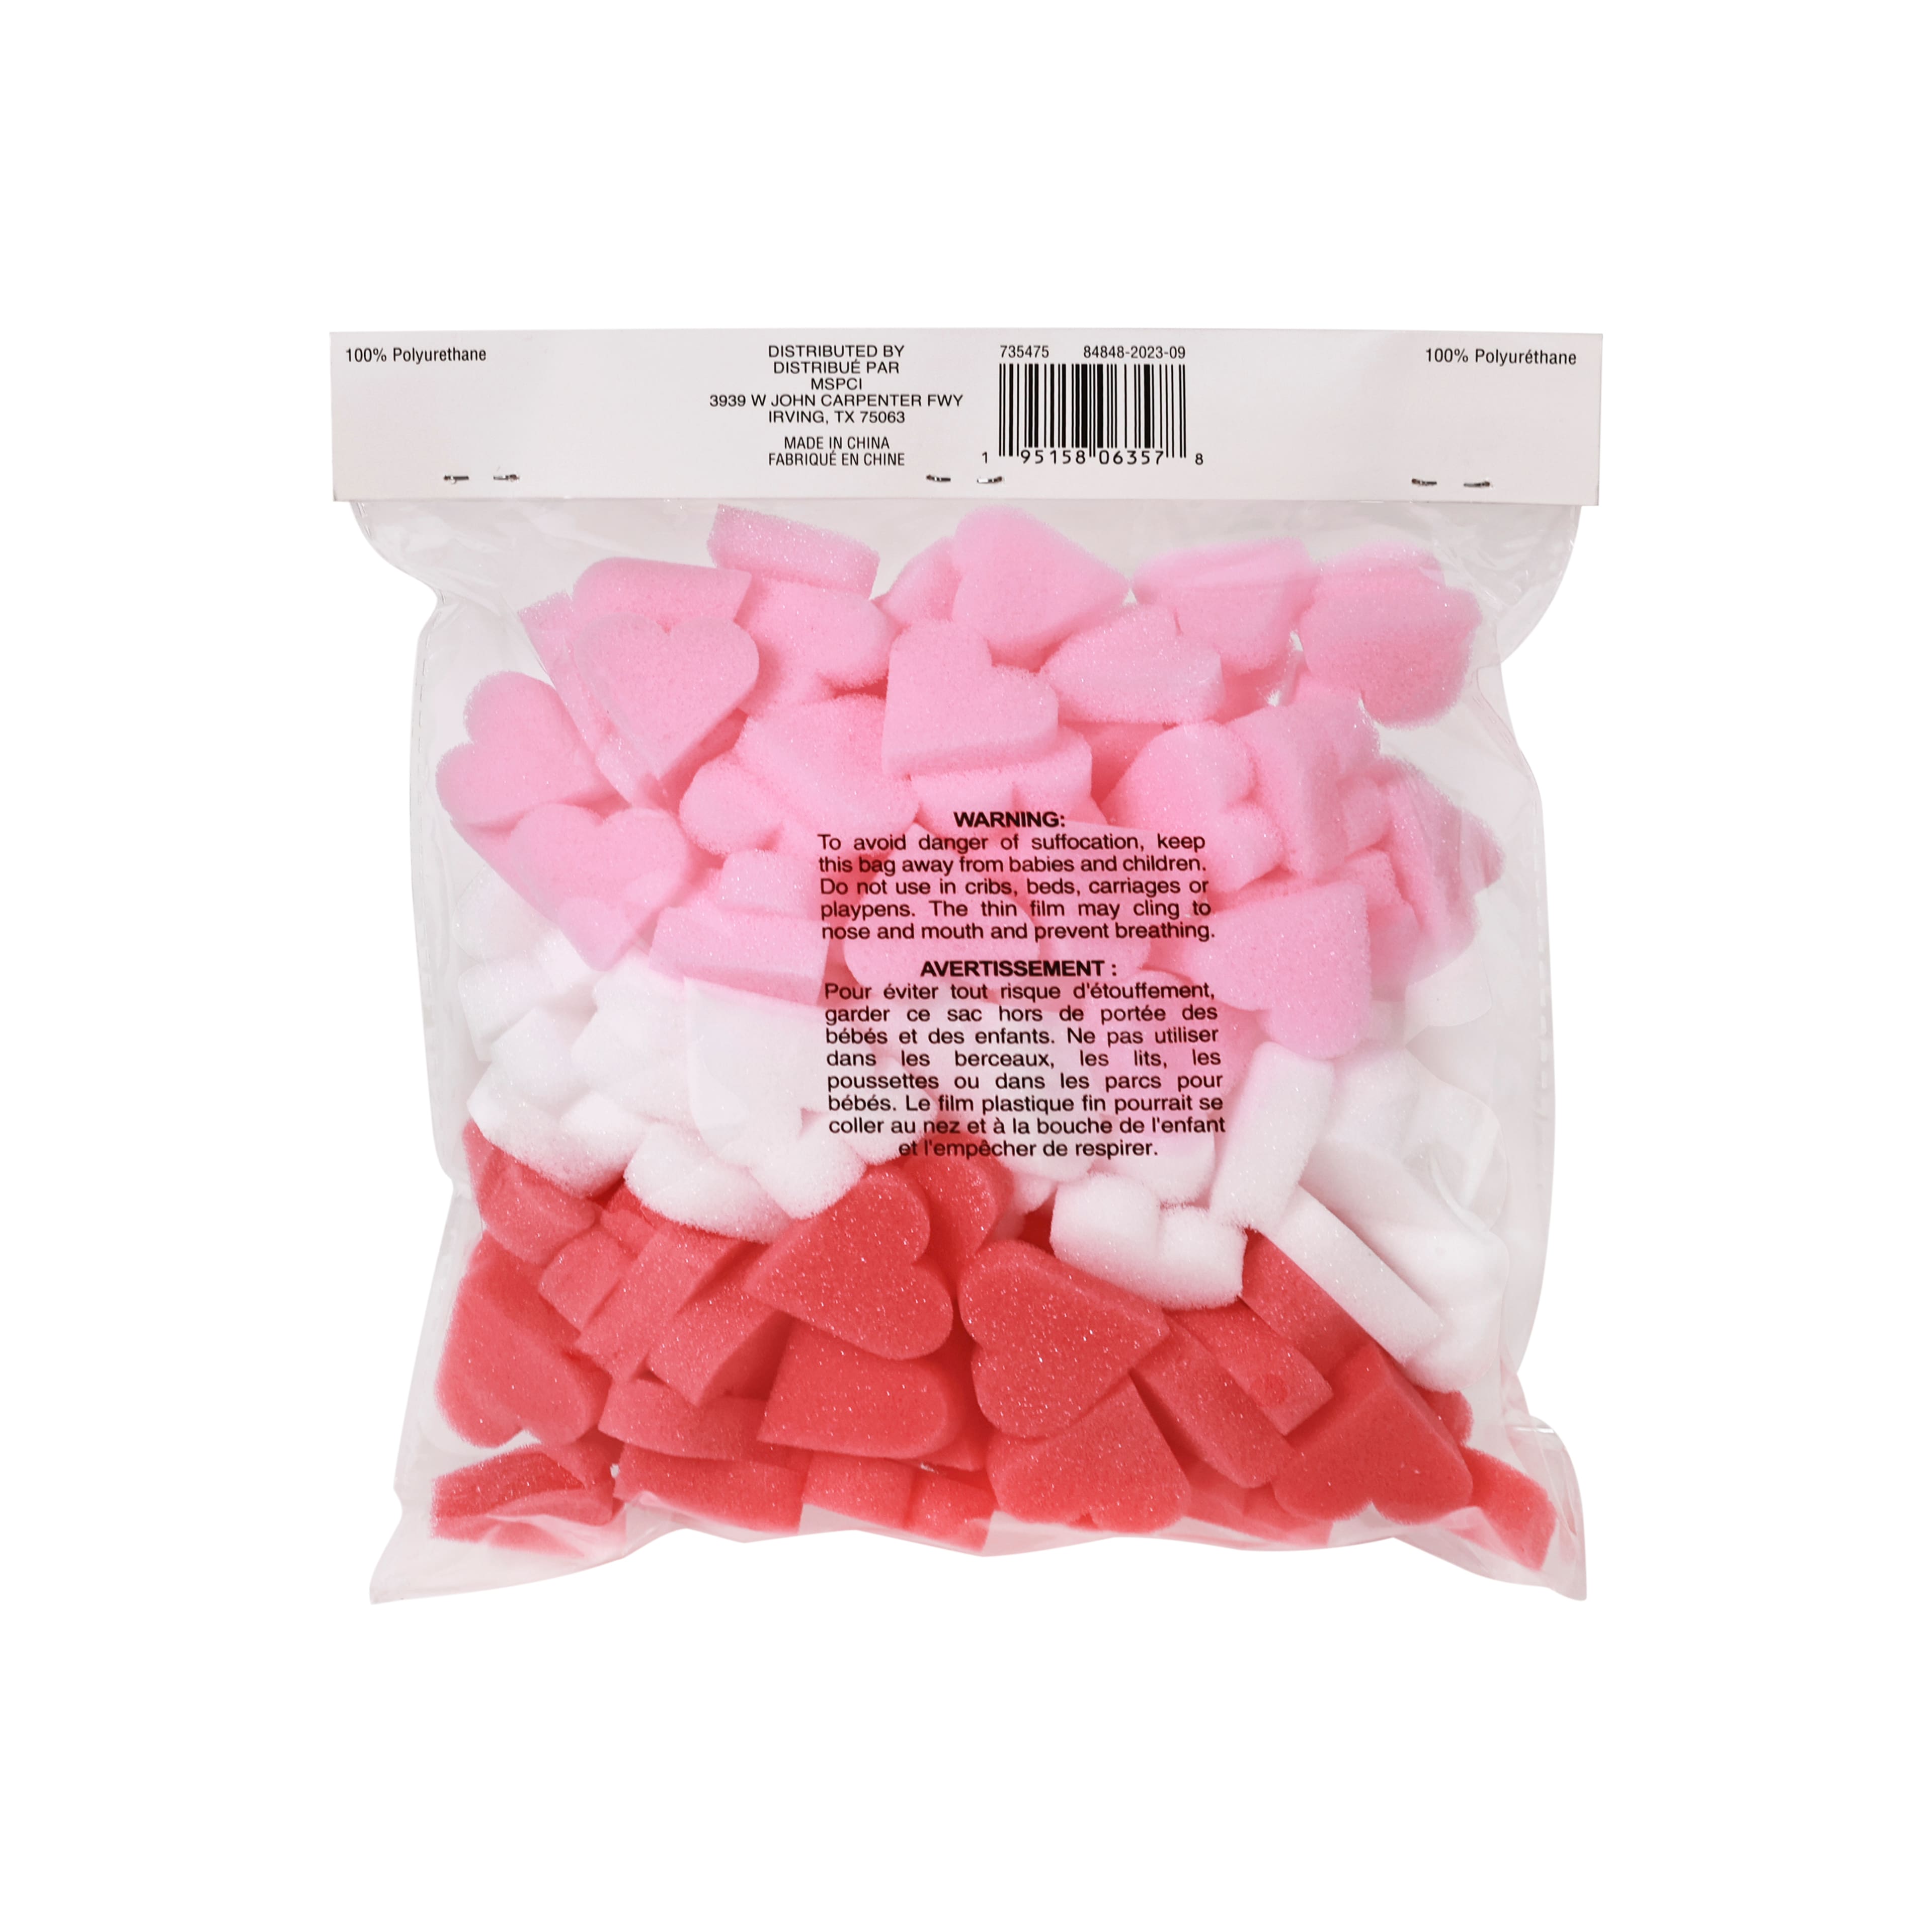 SALE NEW w/o Packaging Lot of 2 Pink Foam Hearts for Crafts/DIY, 2